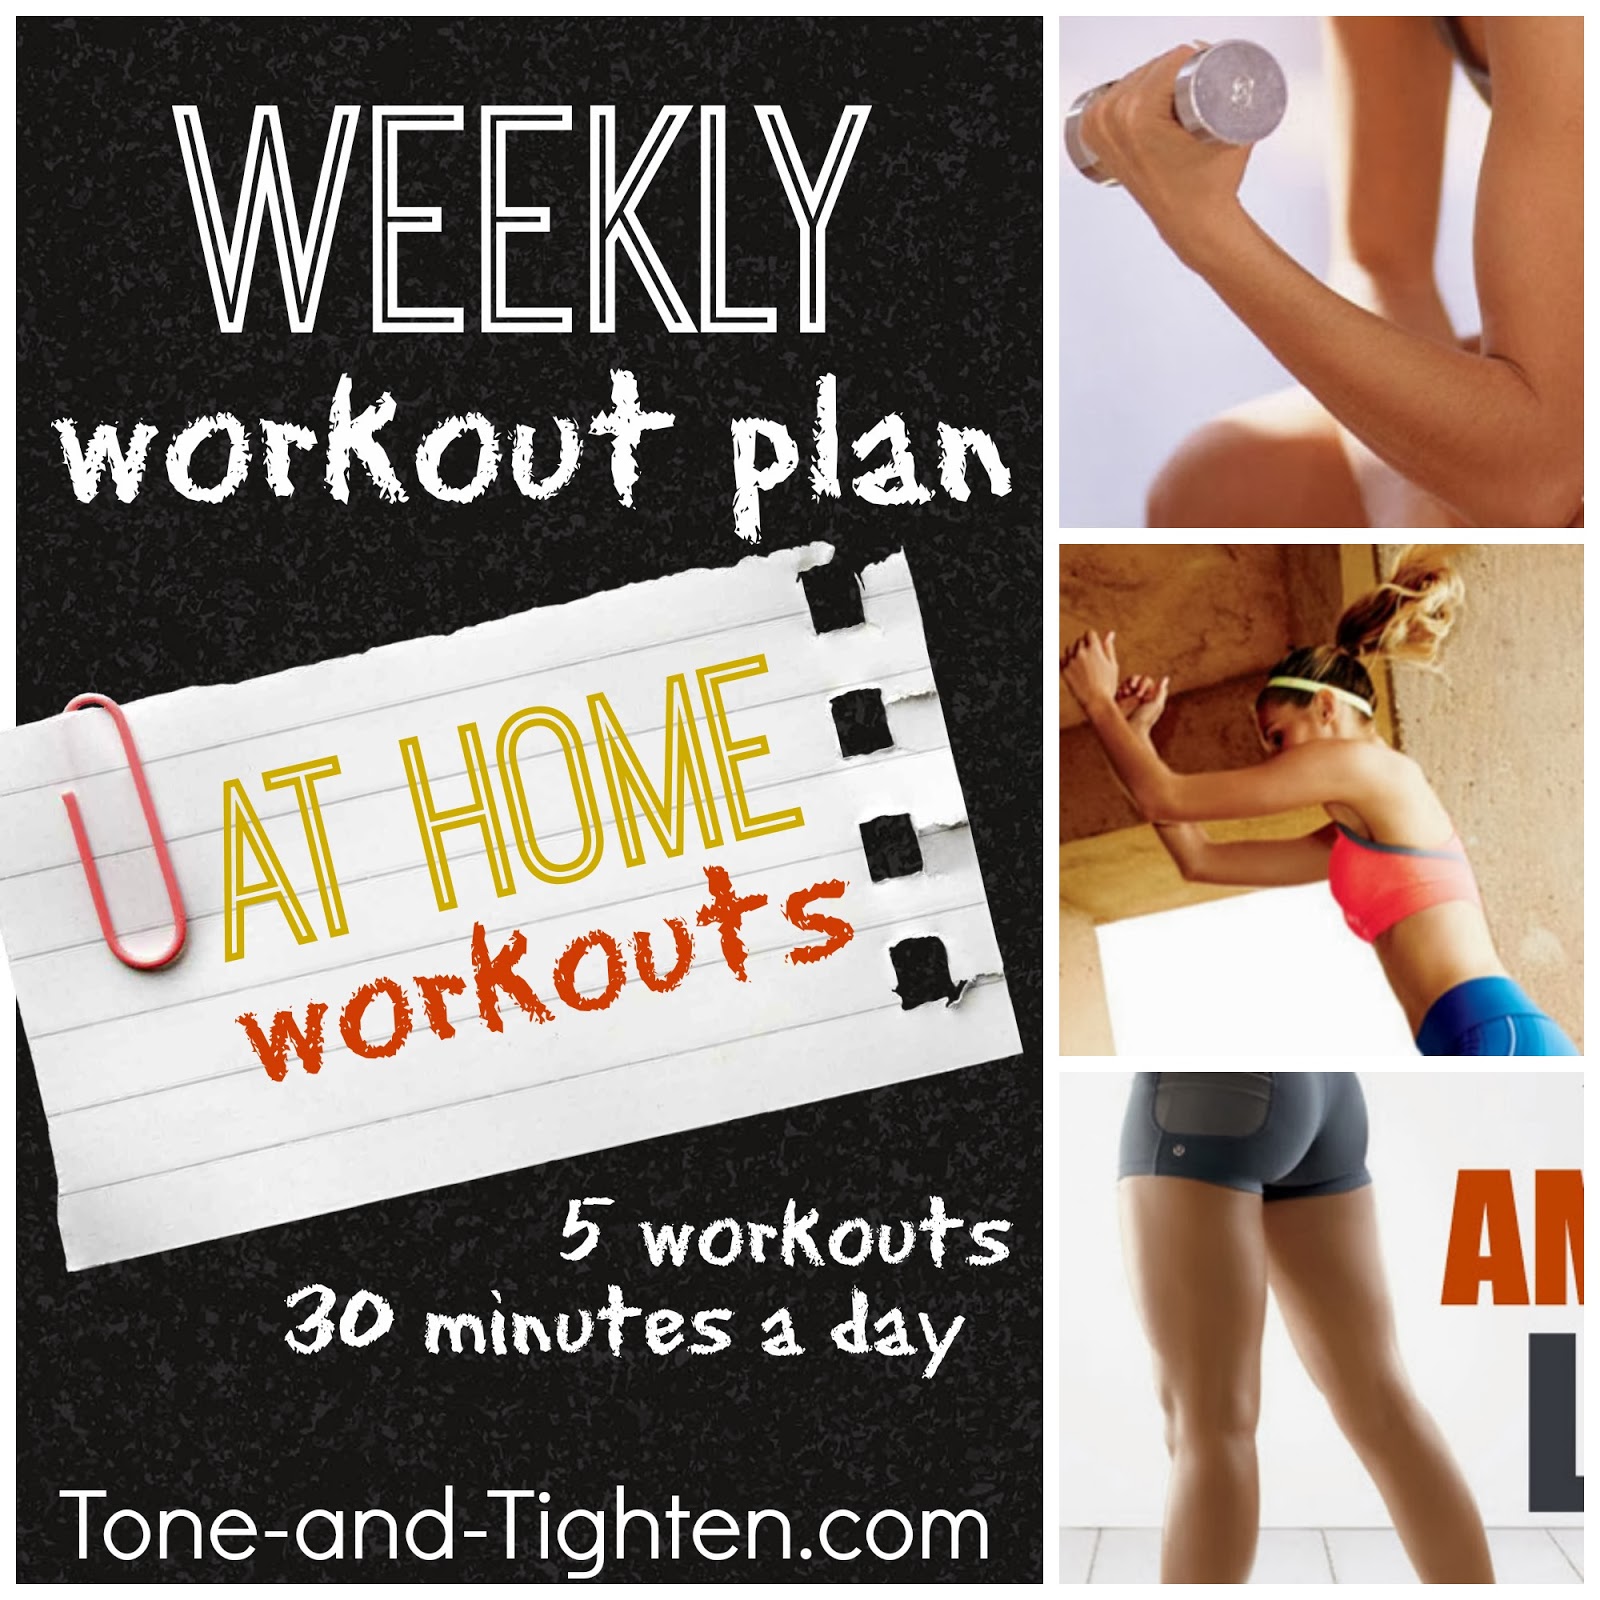 Weekly Workout Plan – At Home Workouts